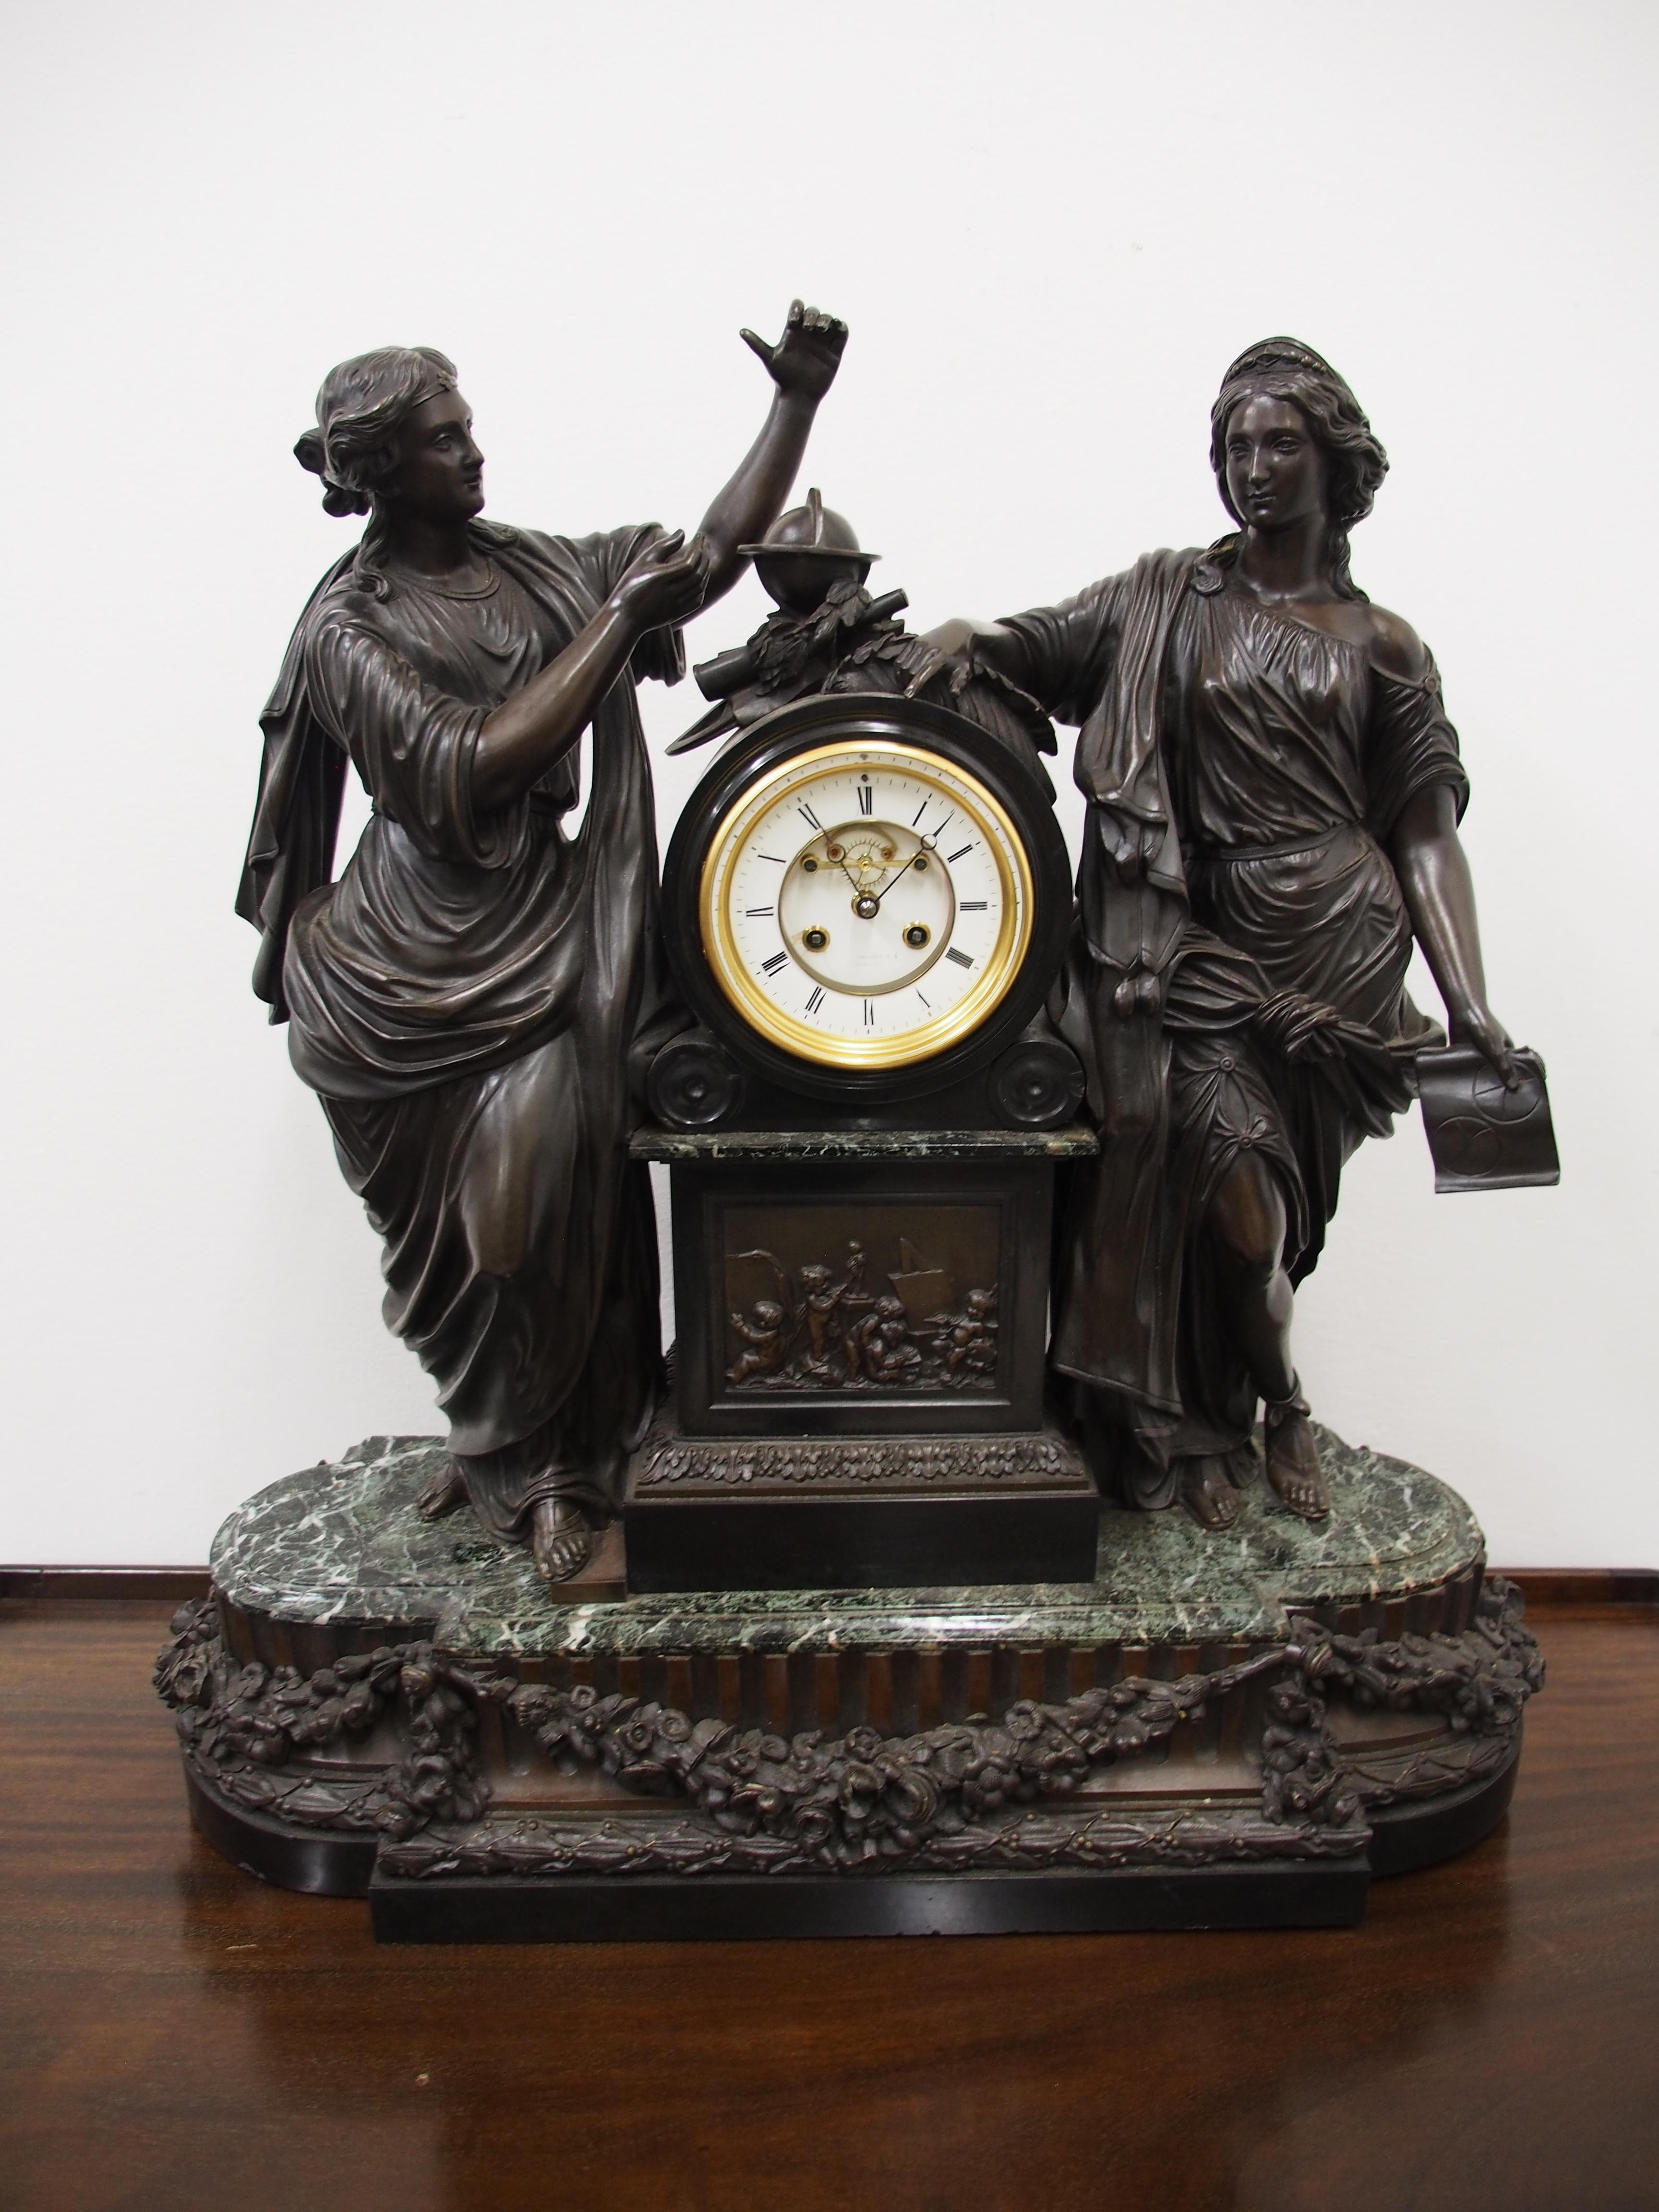 Large French bronze and marble clock garniture emblematic of literature, circa 19th century. The white enamel Roman number dial has an exposed escapement, set in a column surmounted by a trophy representing the arts. The clock is flanked by standing